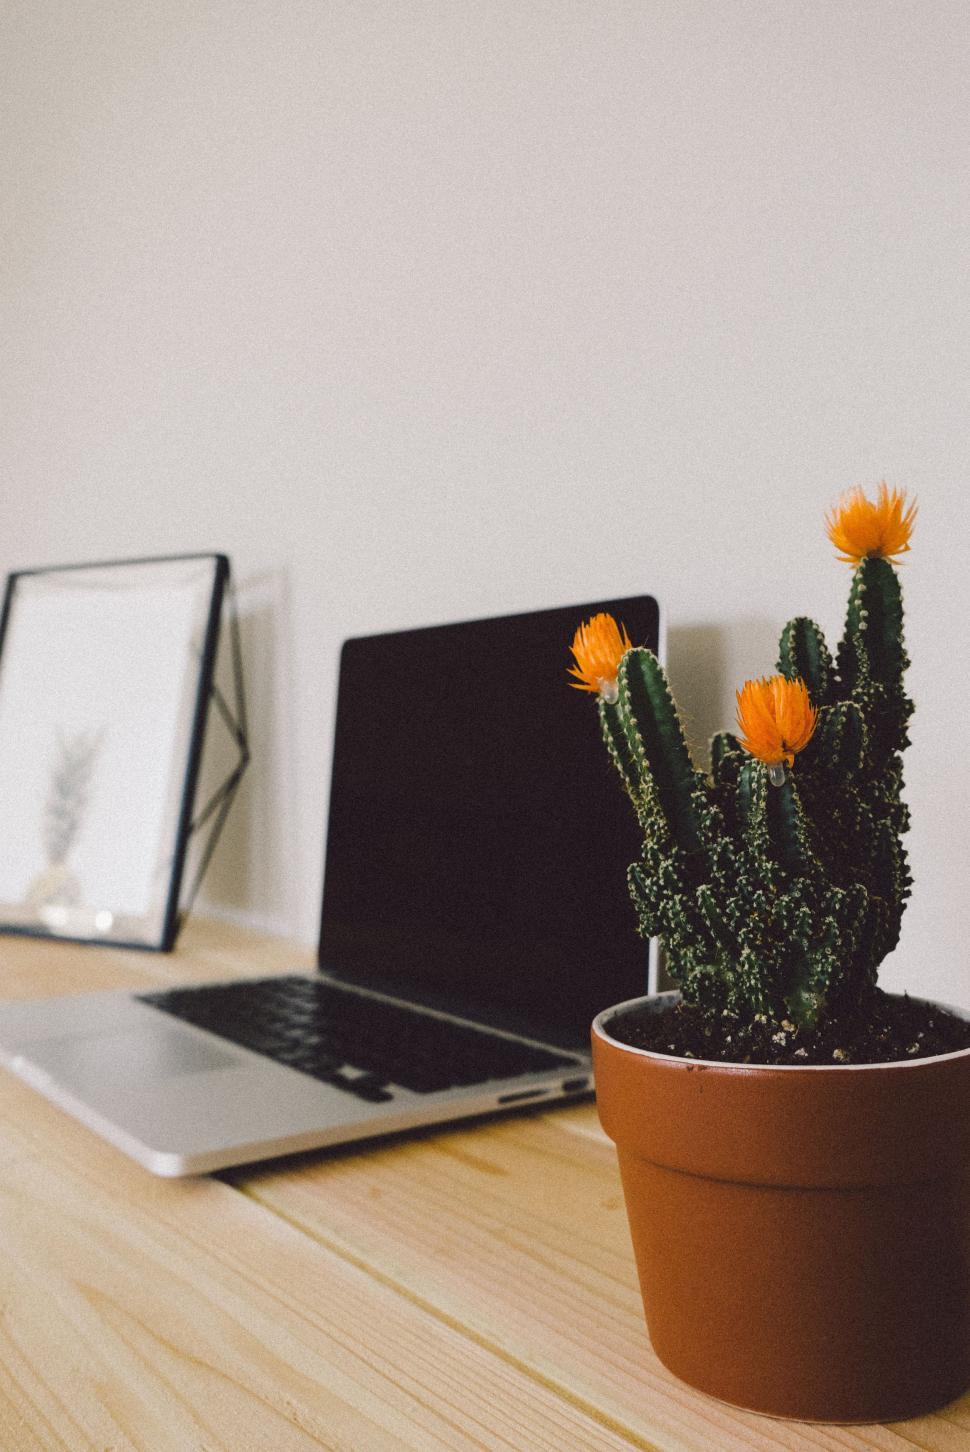 Free Image of Cactus Next to Laptop on Table 